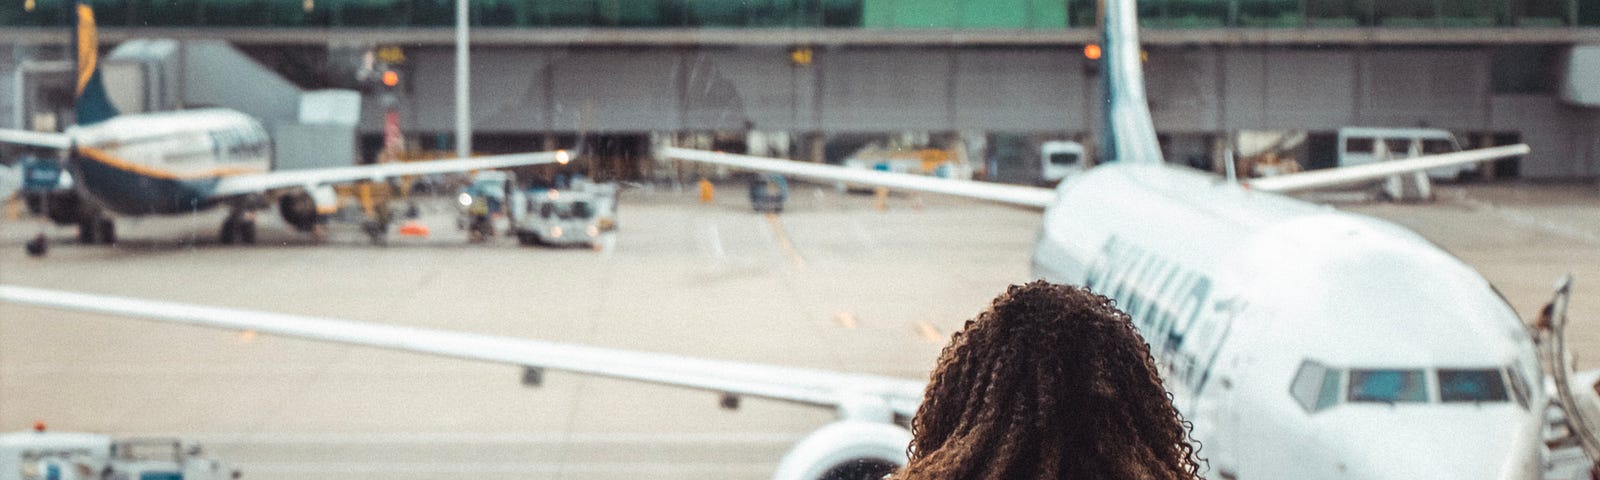 A woman stares out at a plane from a departure lounge at an airport